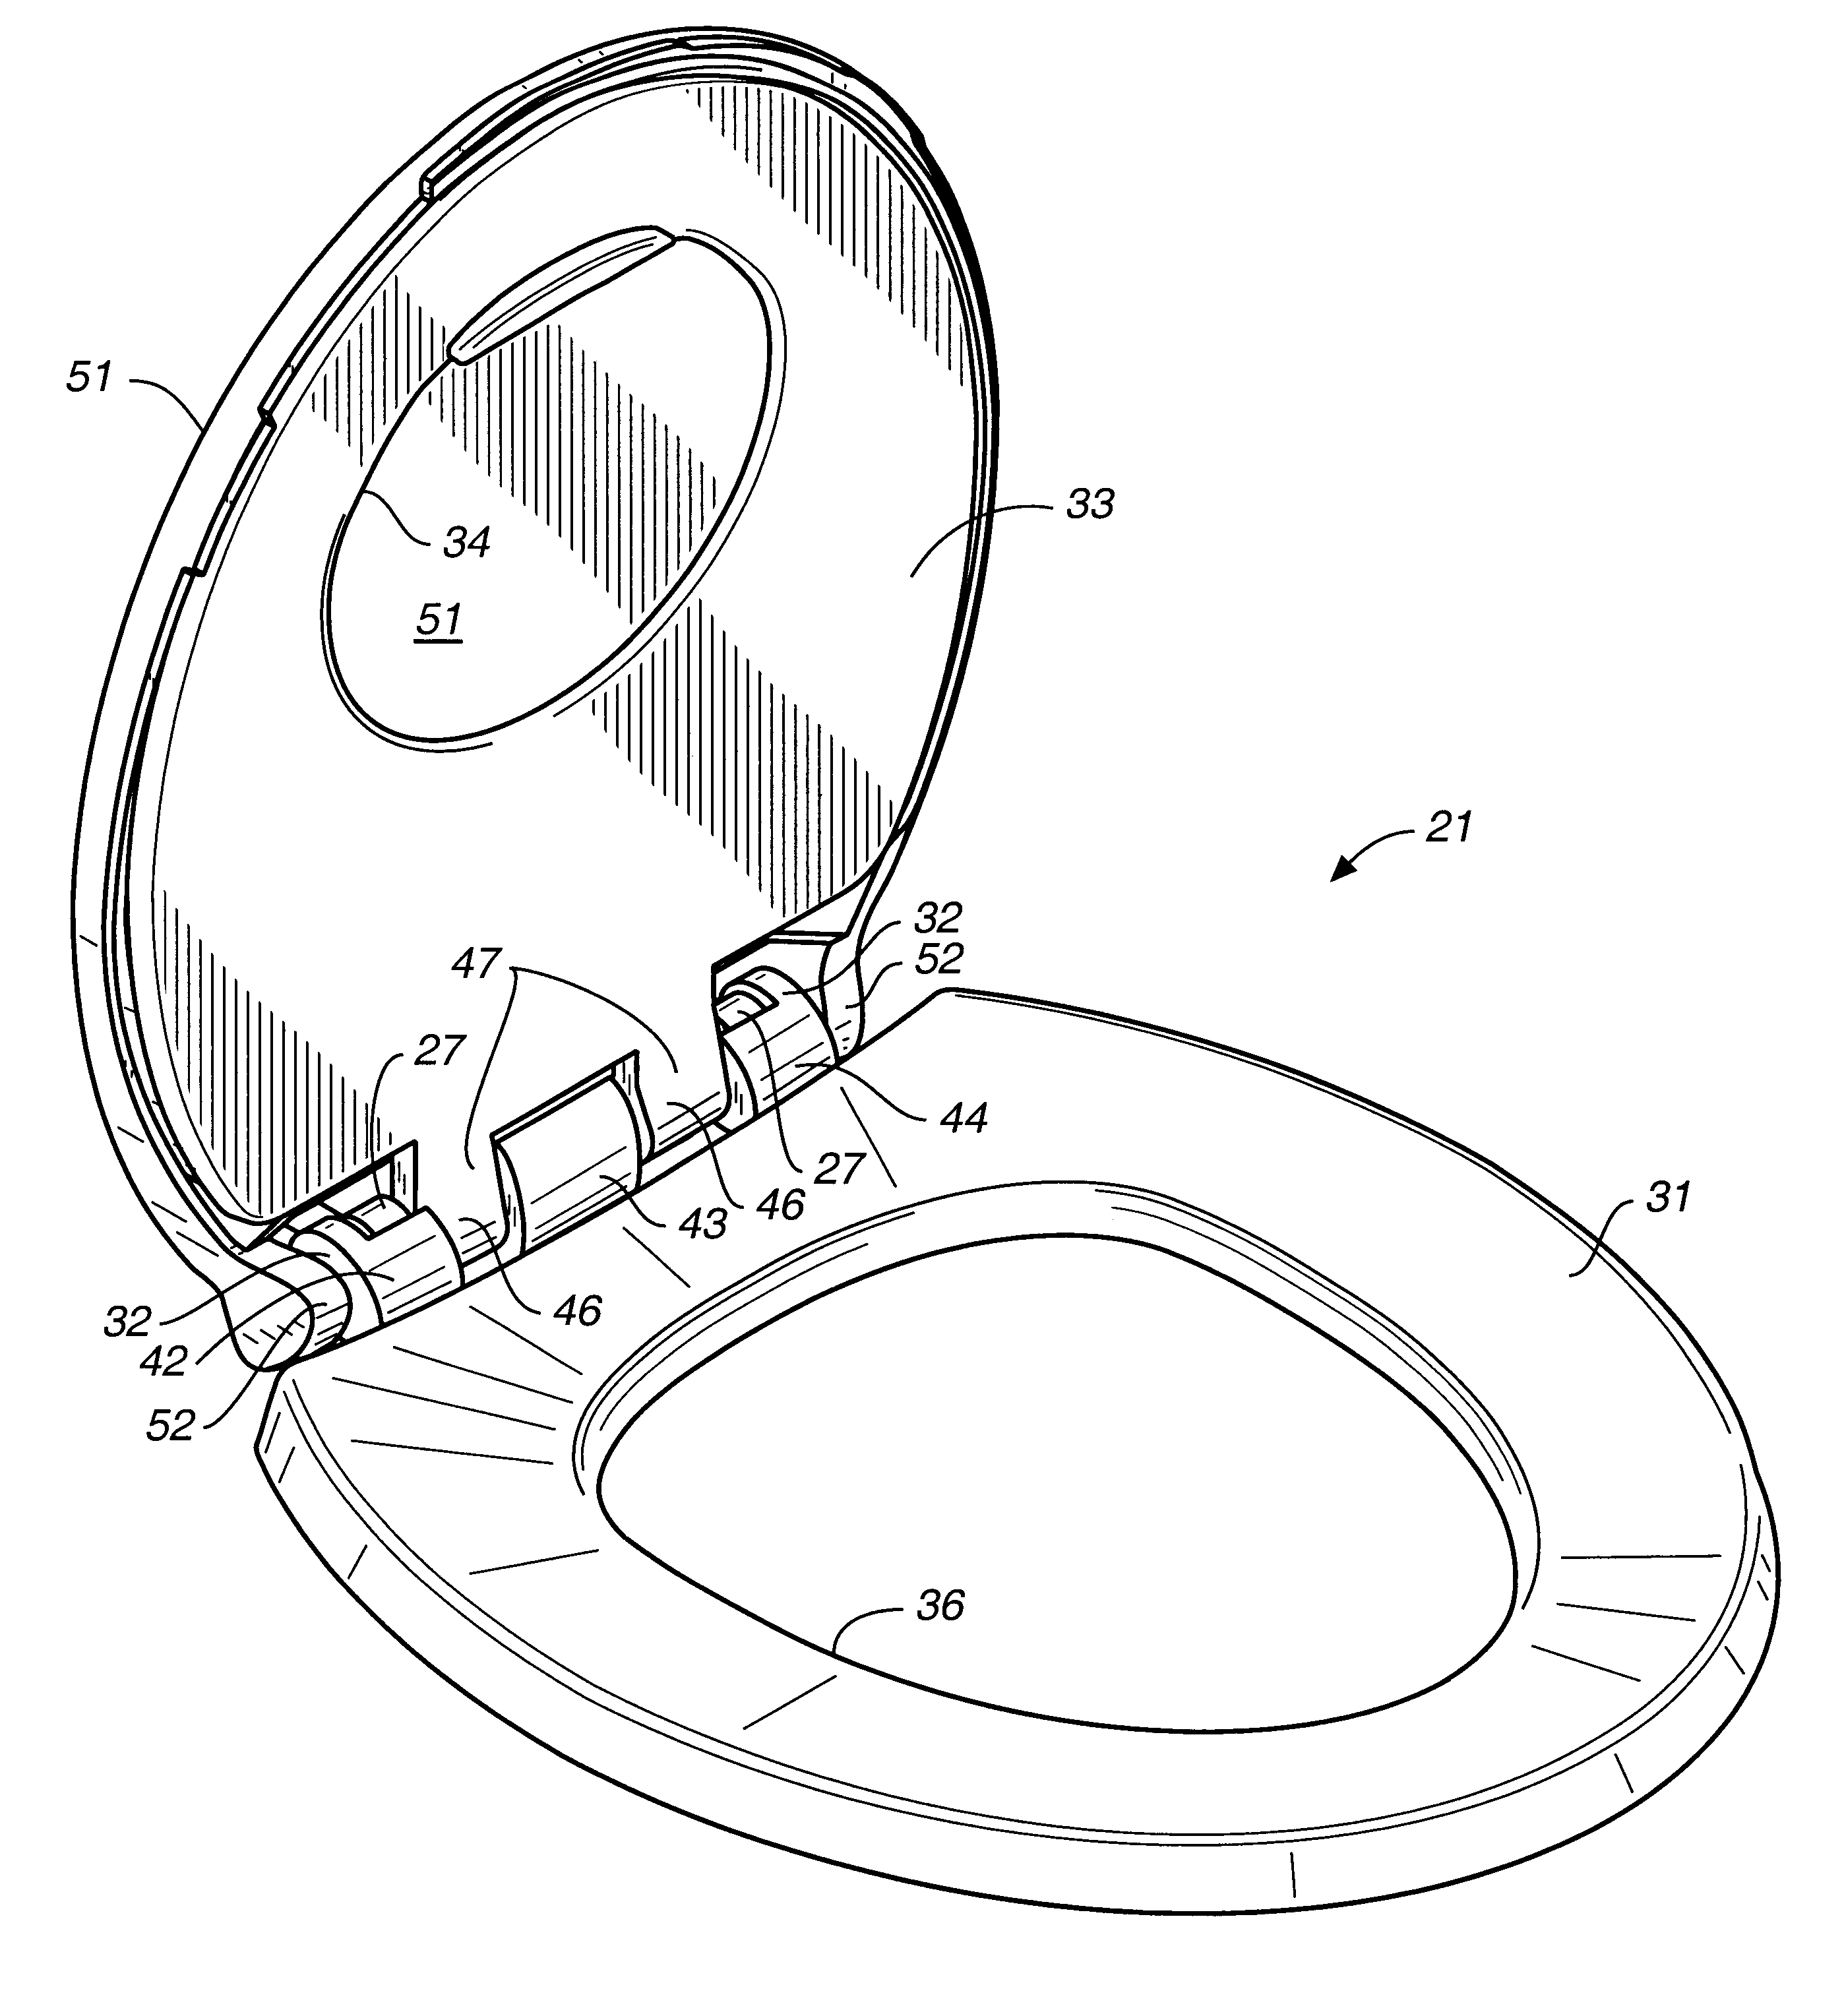 Combined adult and children's toilet seat assembly